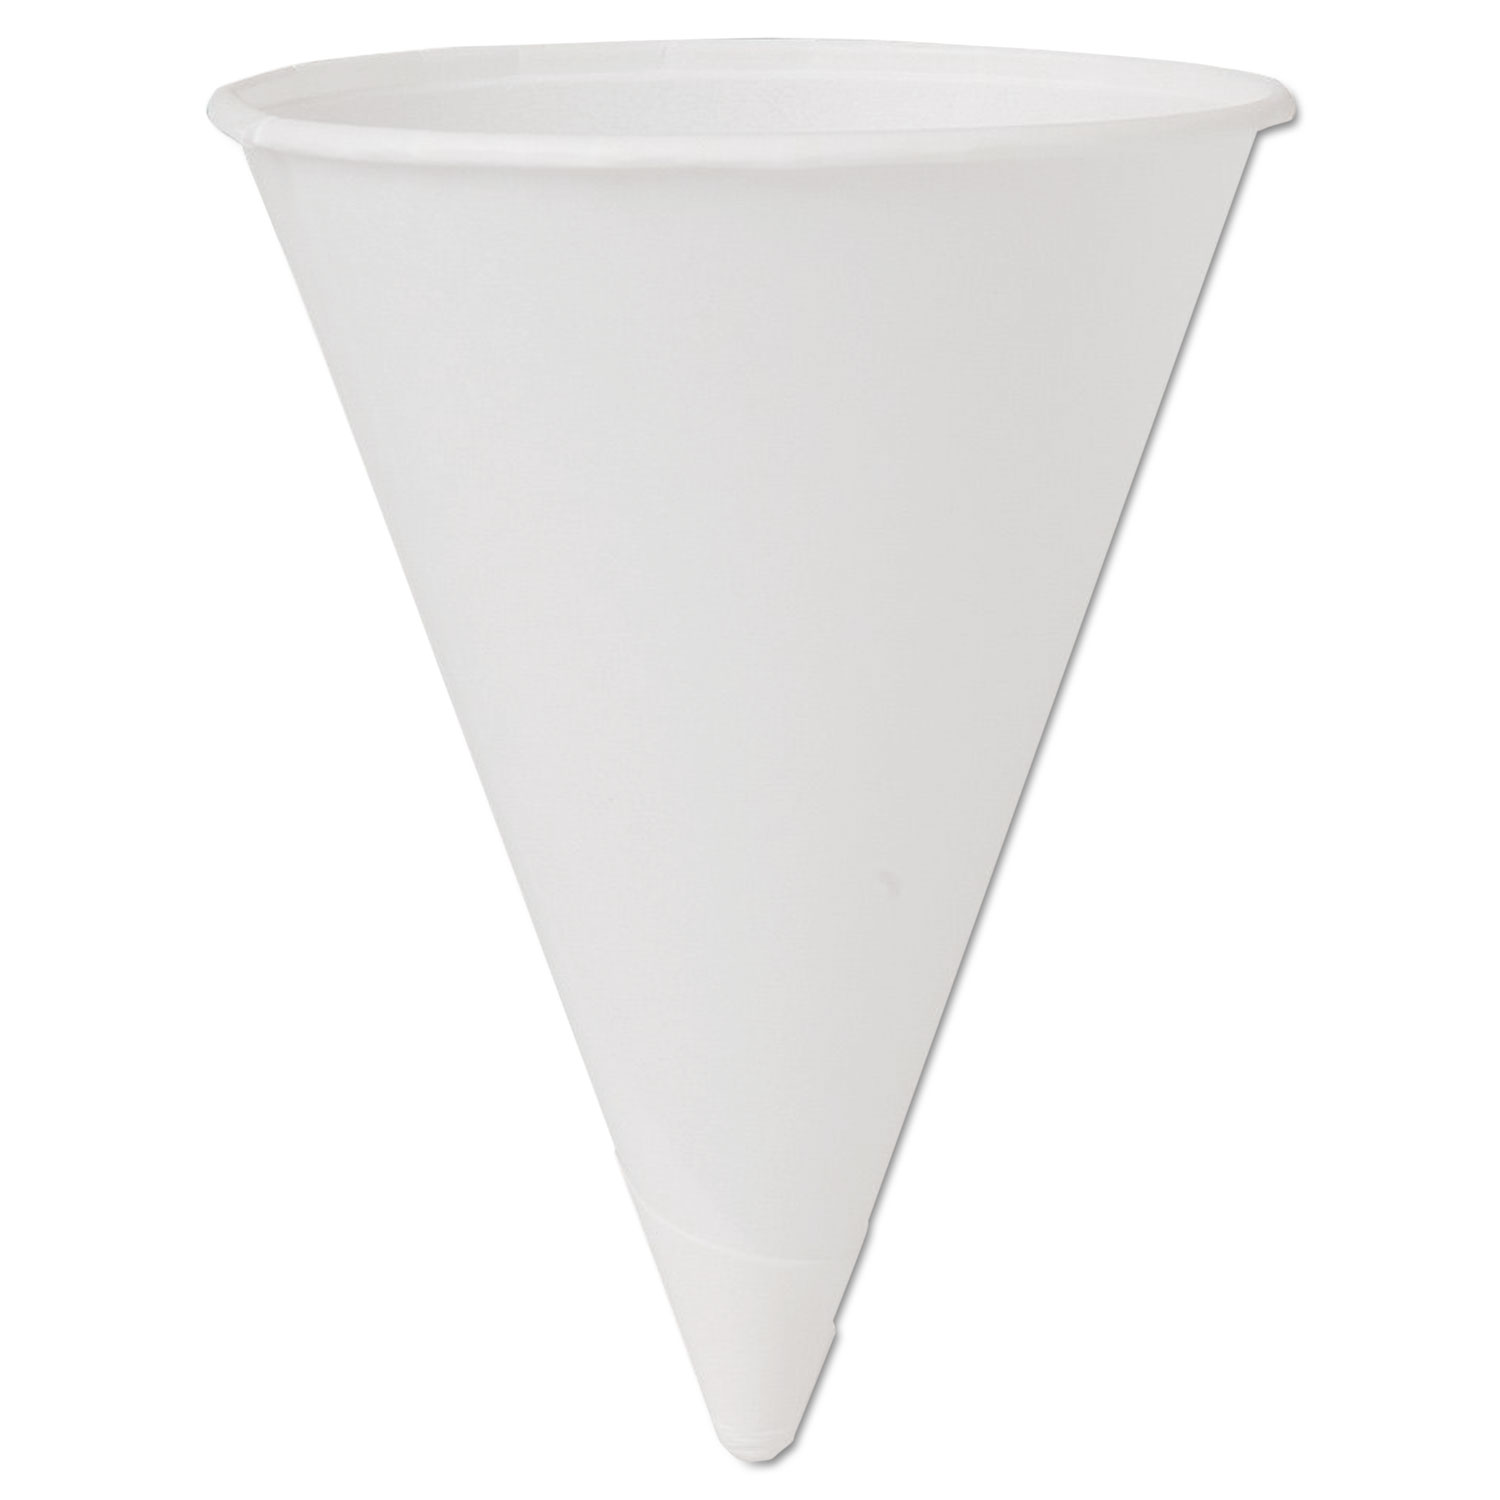  Dart 4BR-2050 Cone Water Cups, Cold, Paper, 4oz, White, 200/Bag, 25 Bags/Carton (SCC4BRCT) 